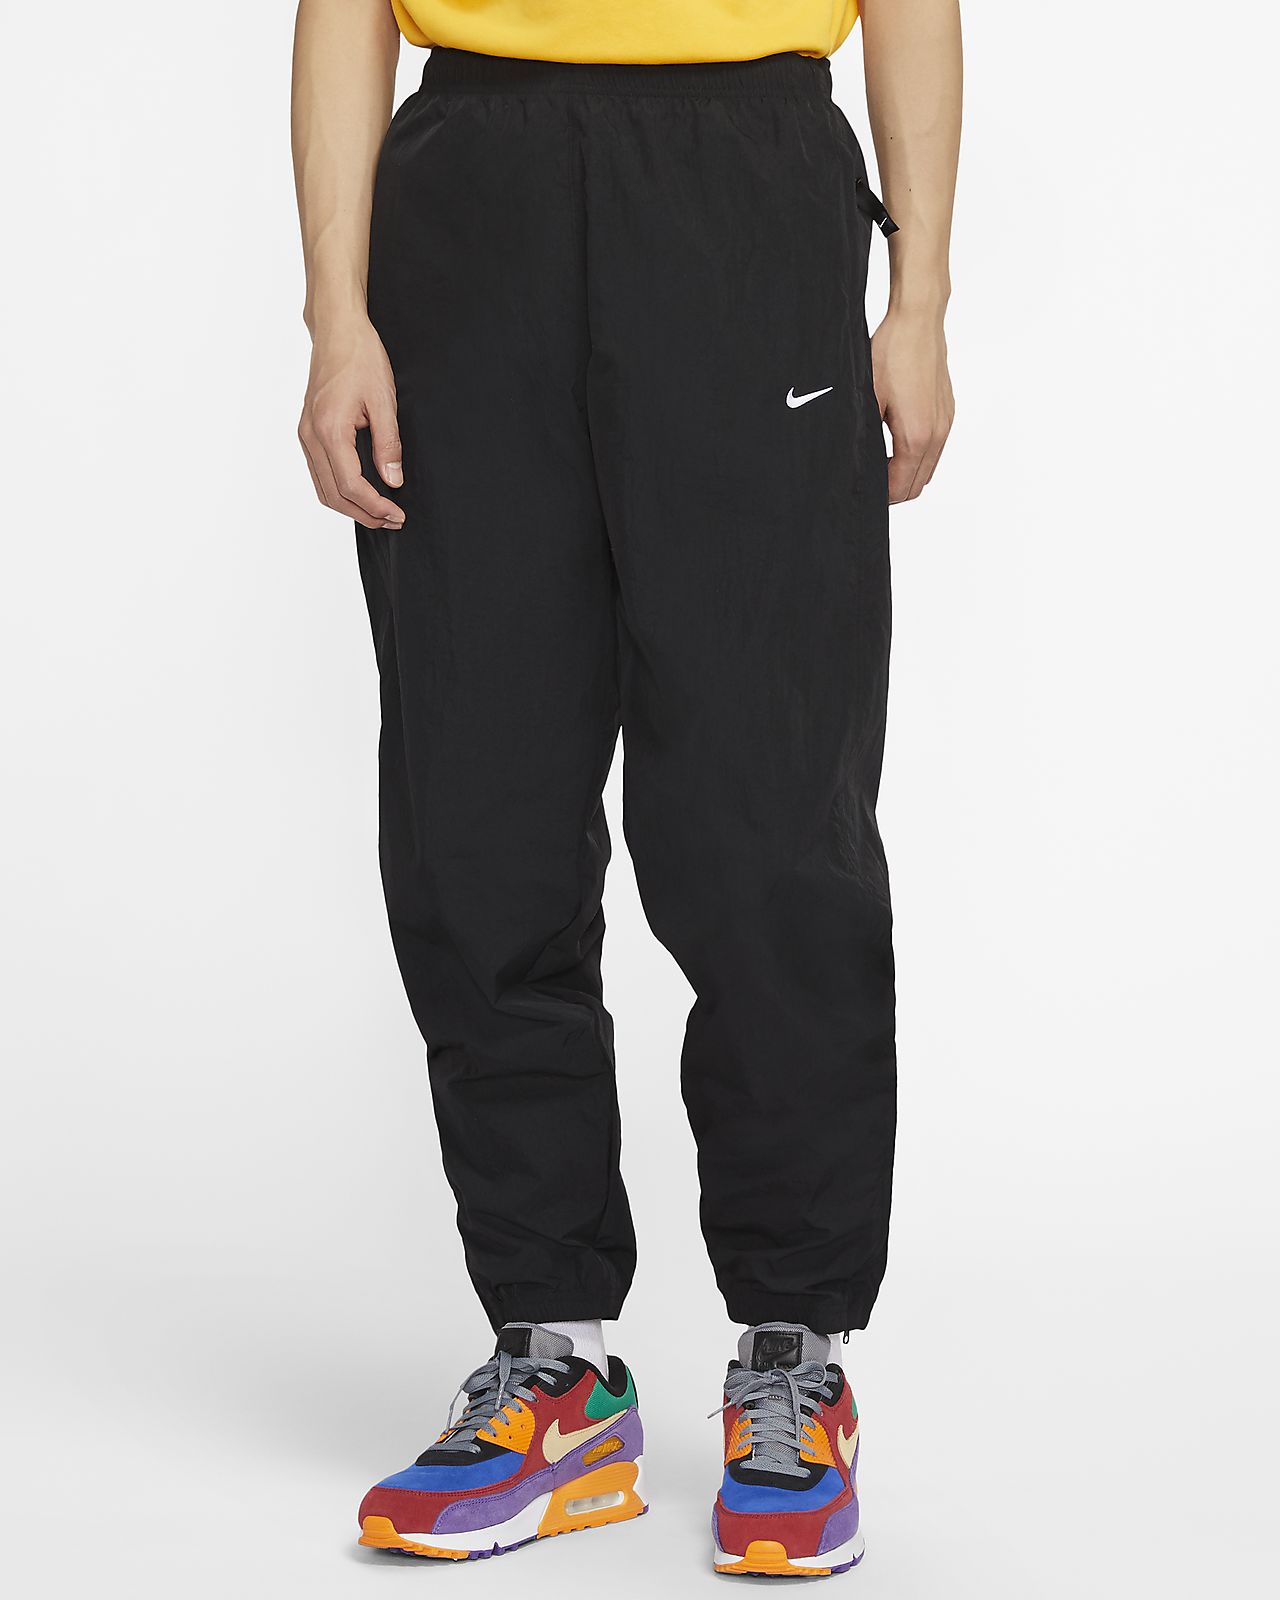 [NIKE Official]NikeLab Men's Track Pants.Online store (mail order site)